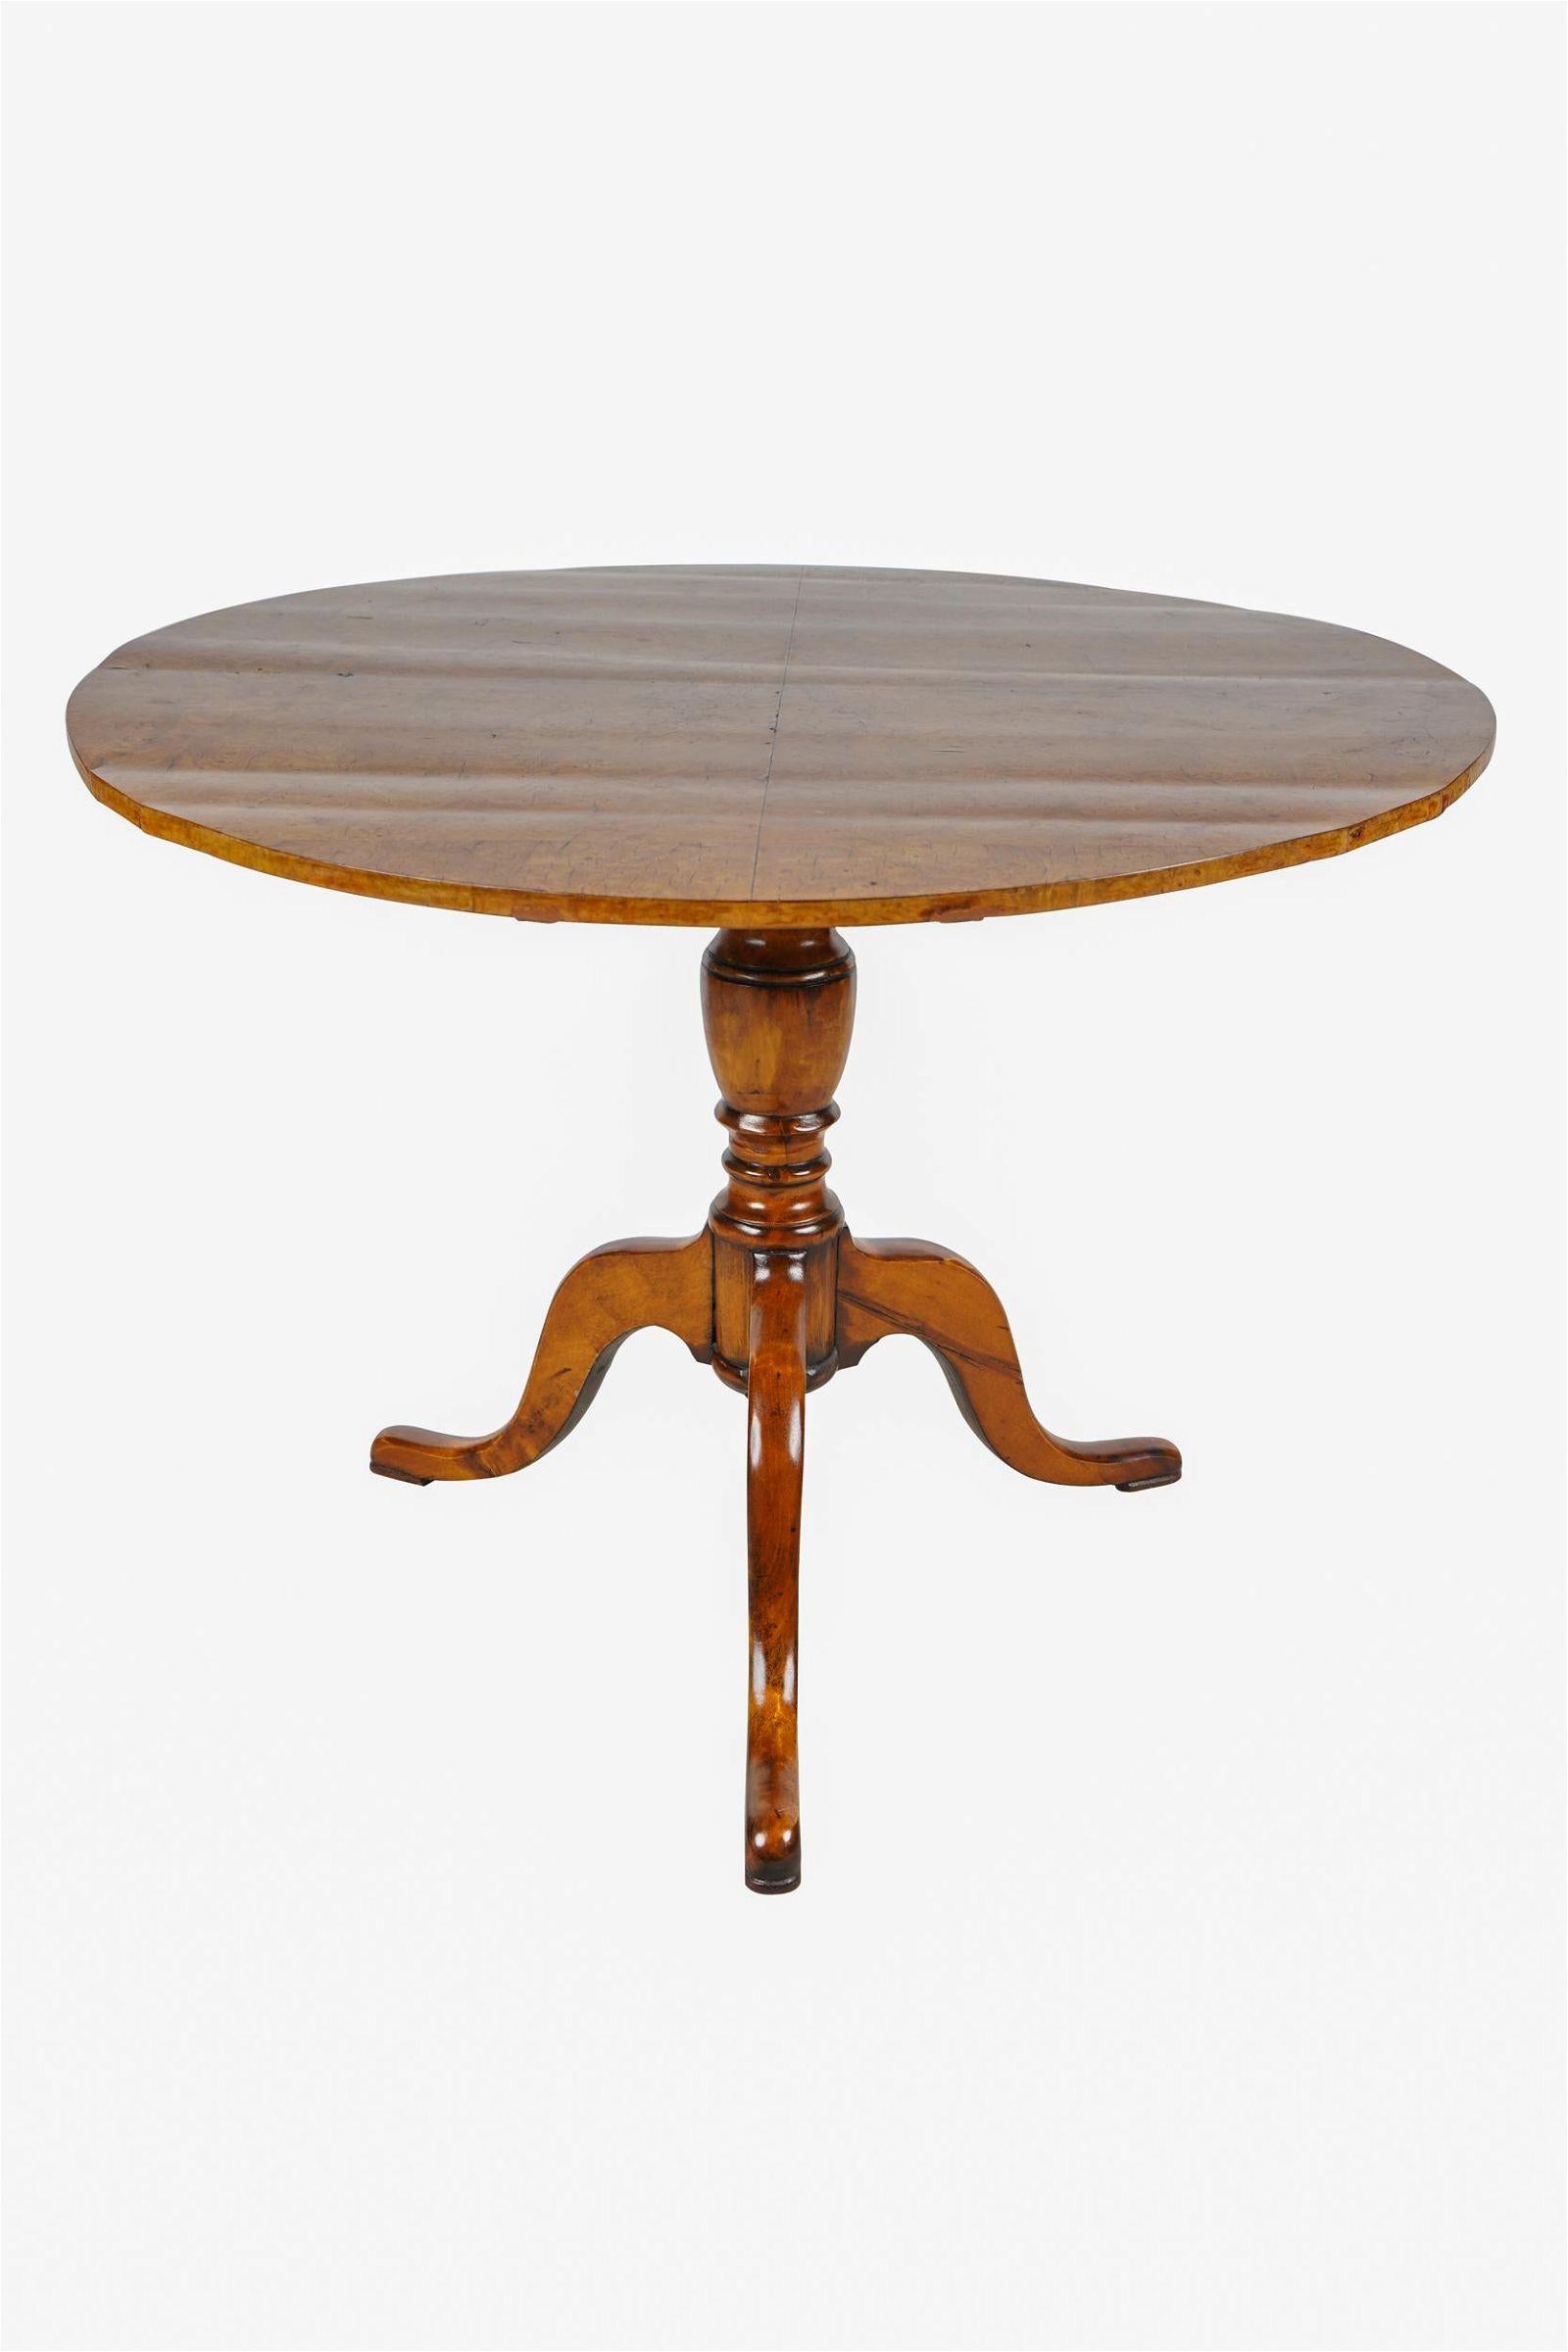 Antique Period Late 18th Century American Federal Period Maple Tilt Top Side Table with tripod pedestal base and a burl wood veneered top.